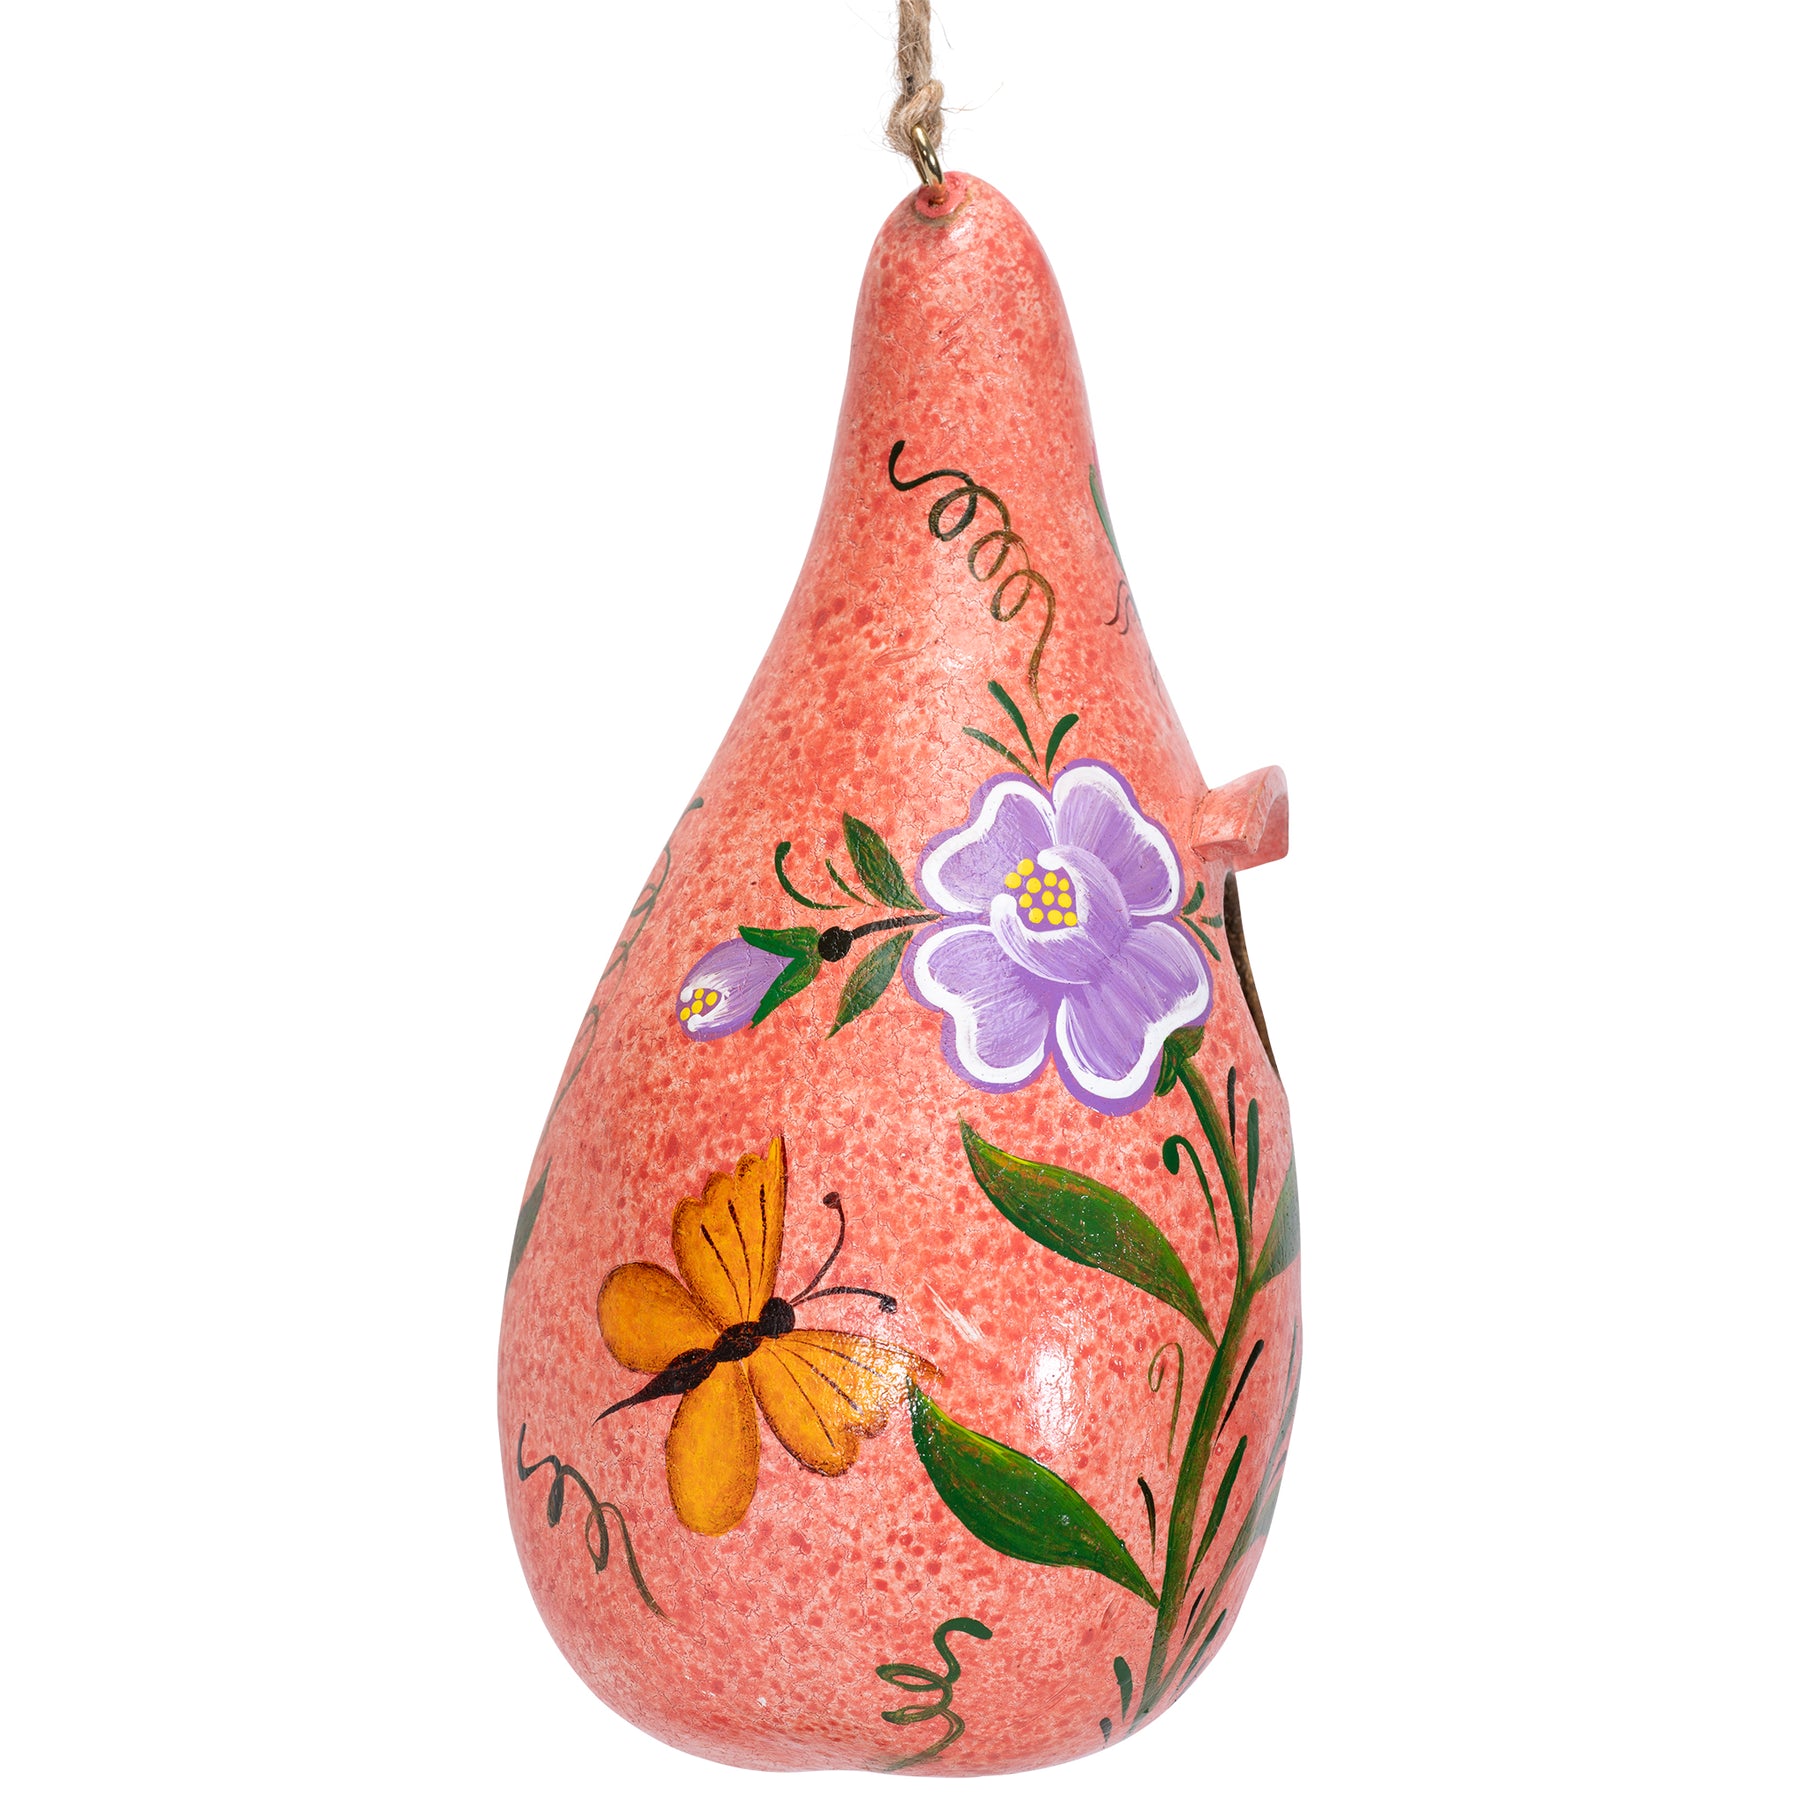 Butterfly & Dragonfly - Painted Gourd Birdhouse